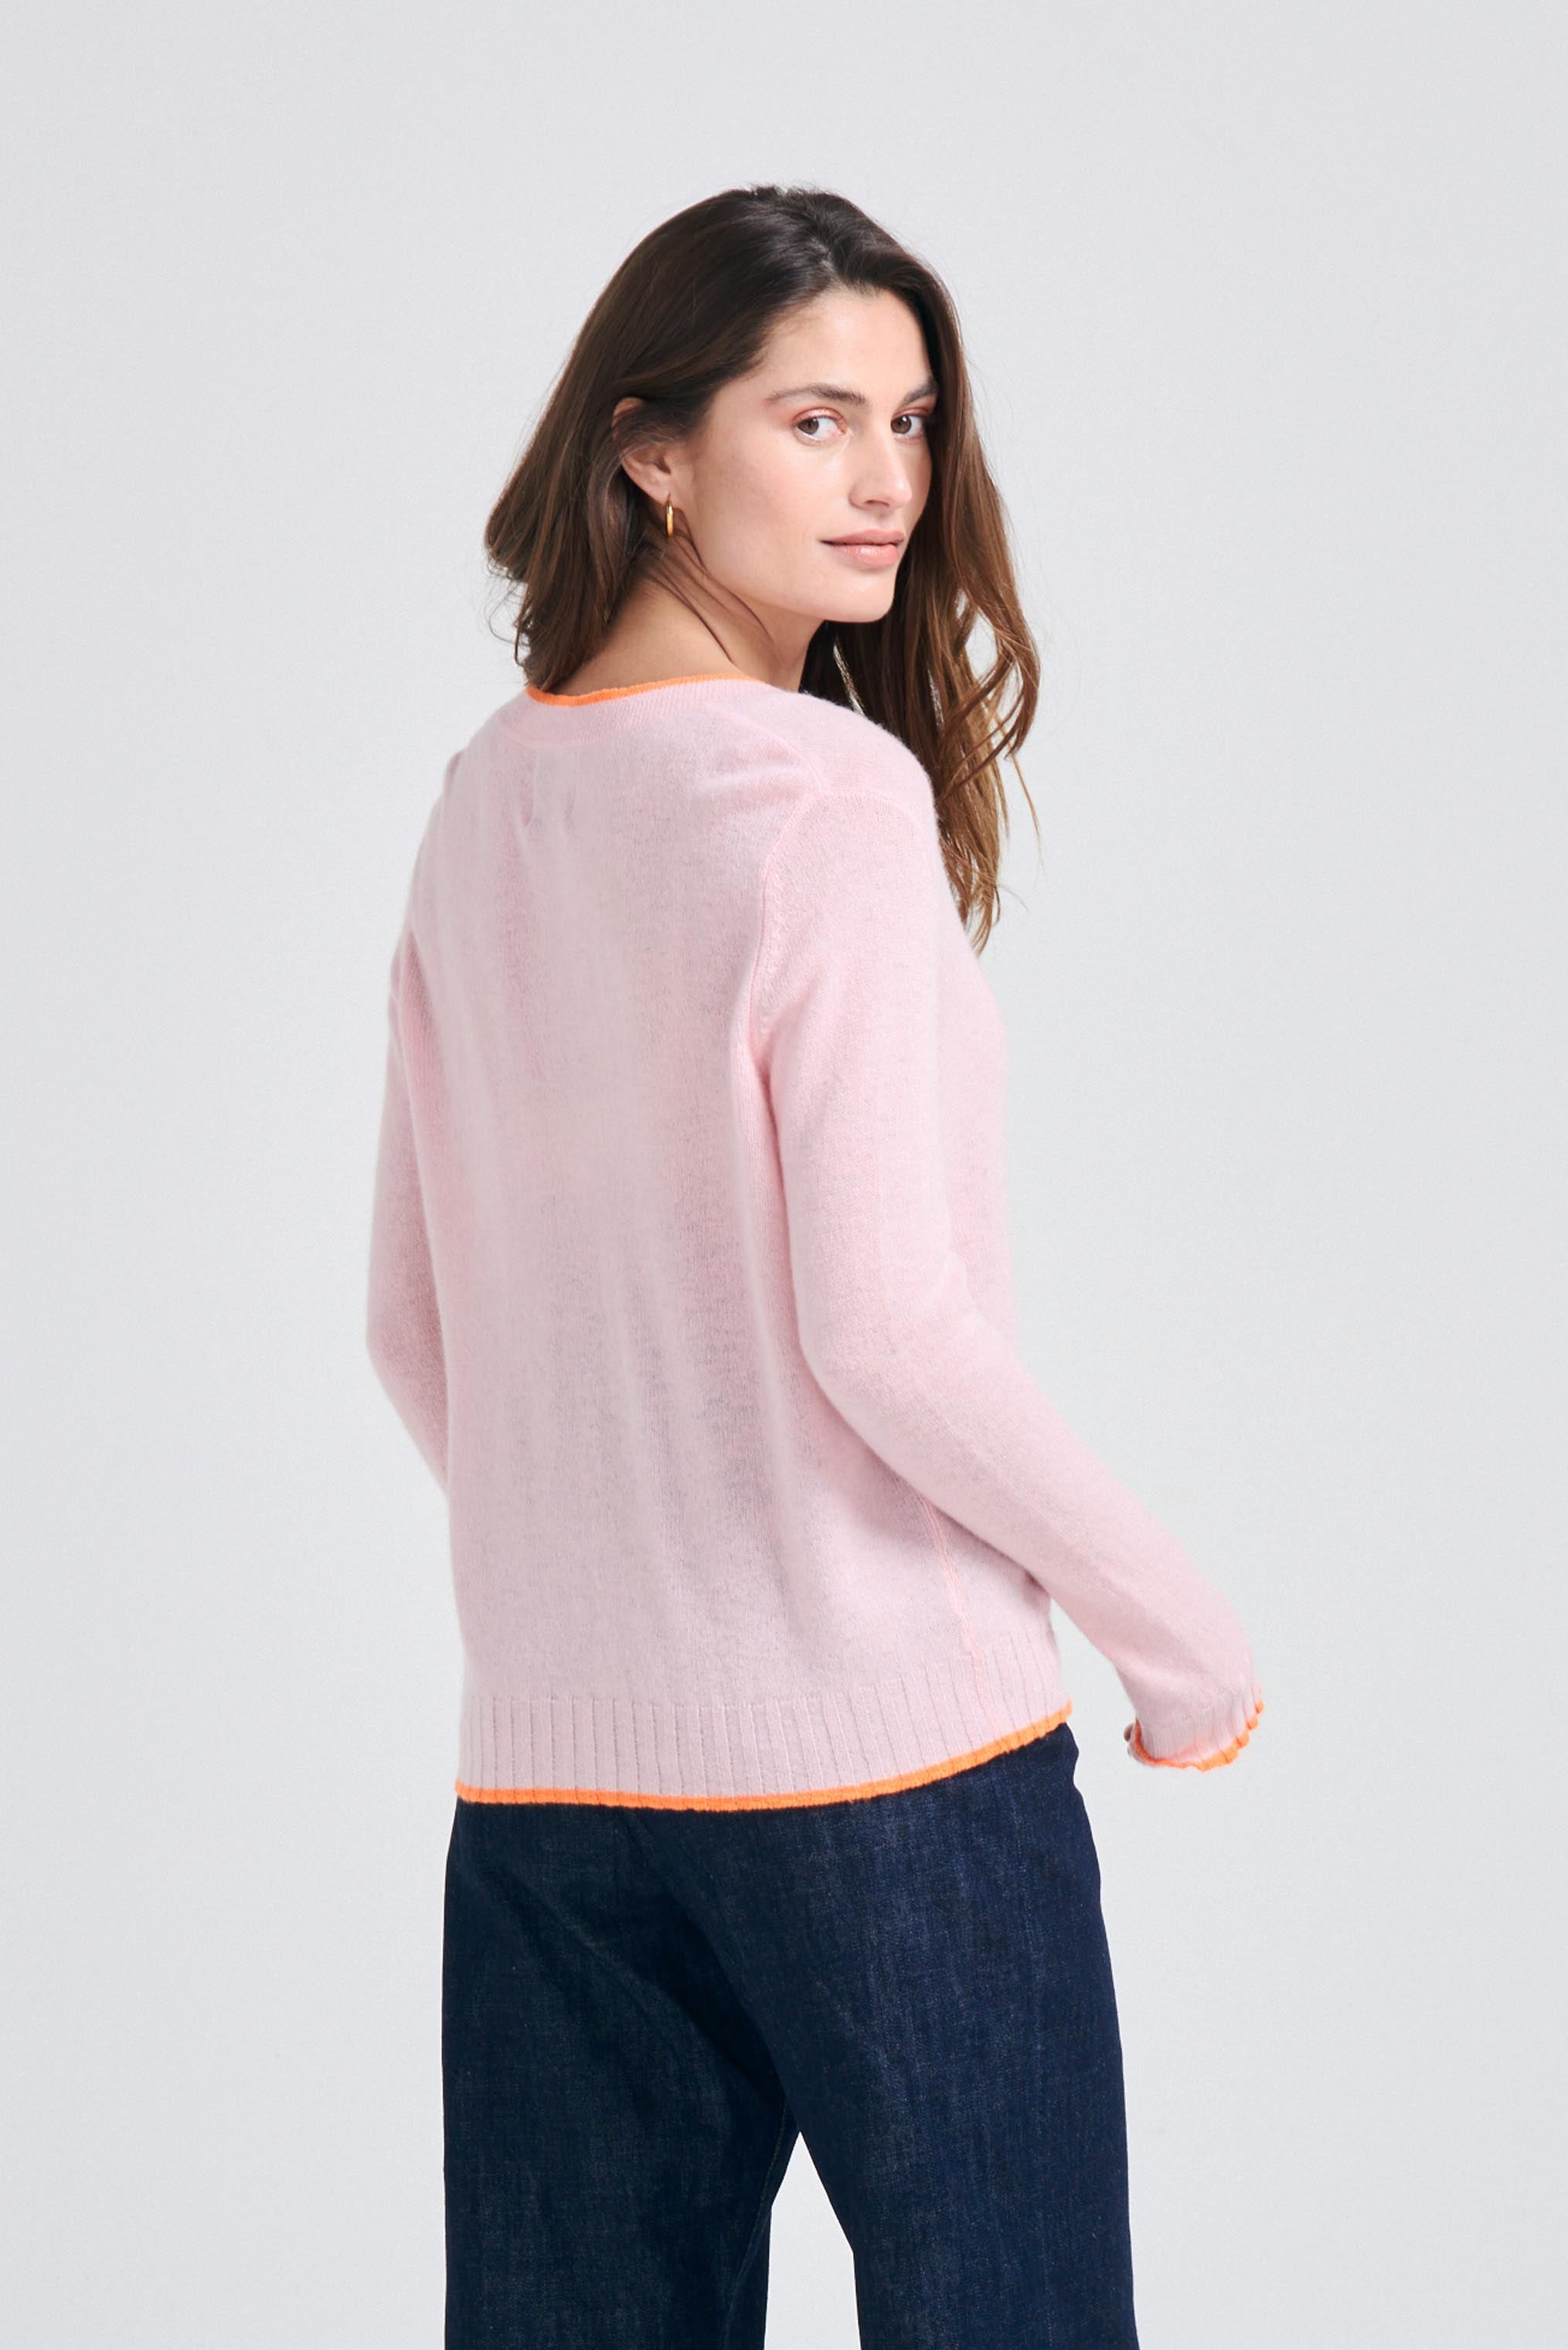 Brown haired female model wearing Jumper1234 Pale pink cashmere vee neck cardigan with neon orange tipping facing away from the camera